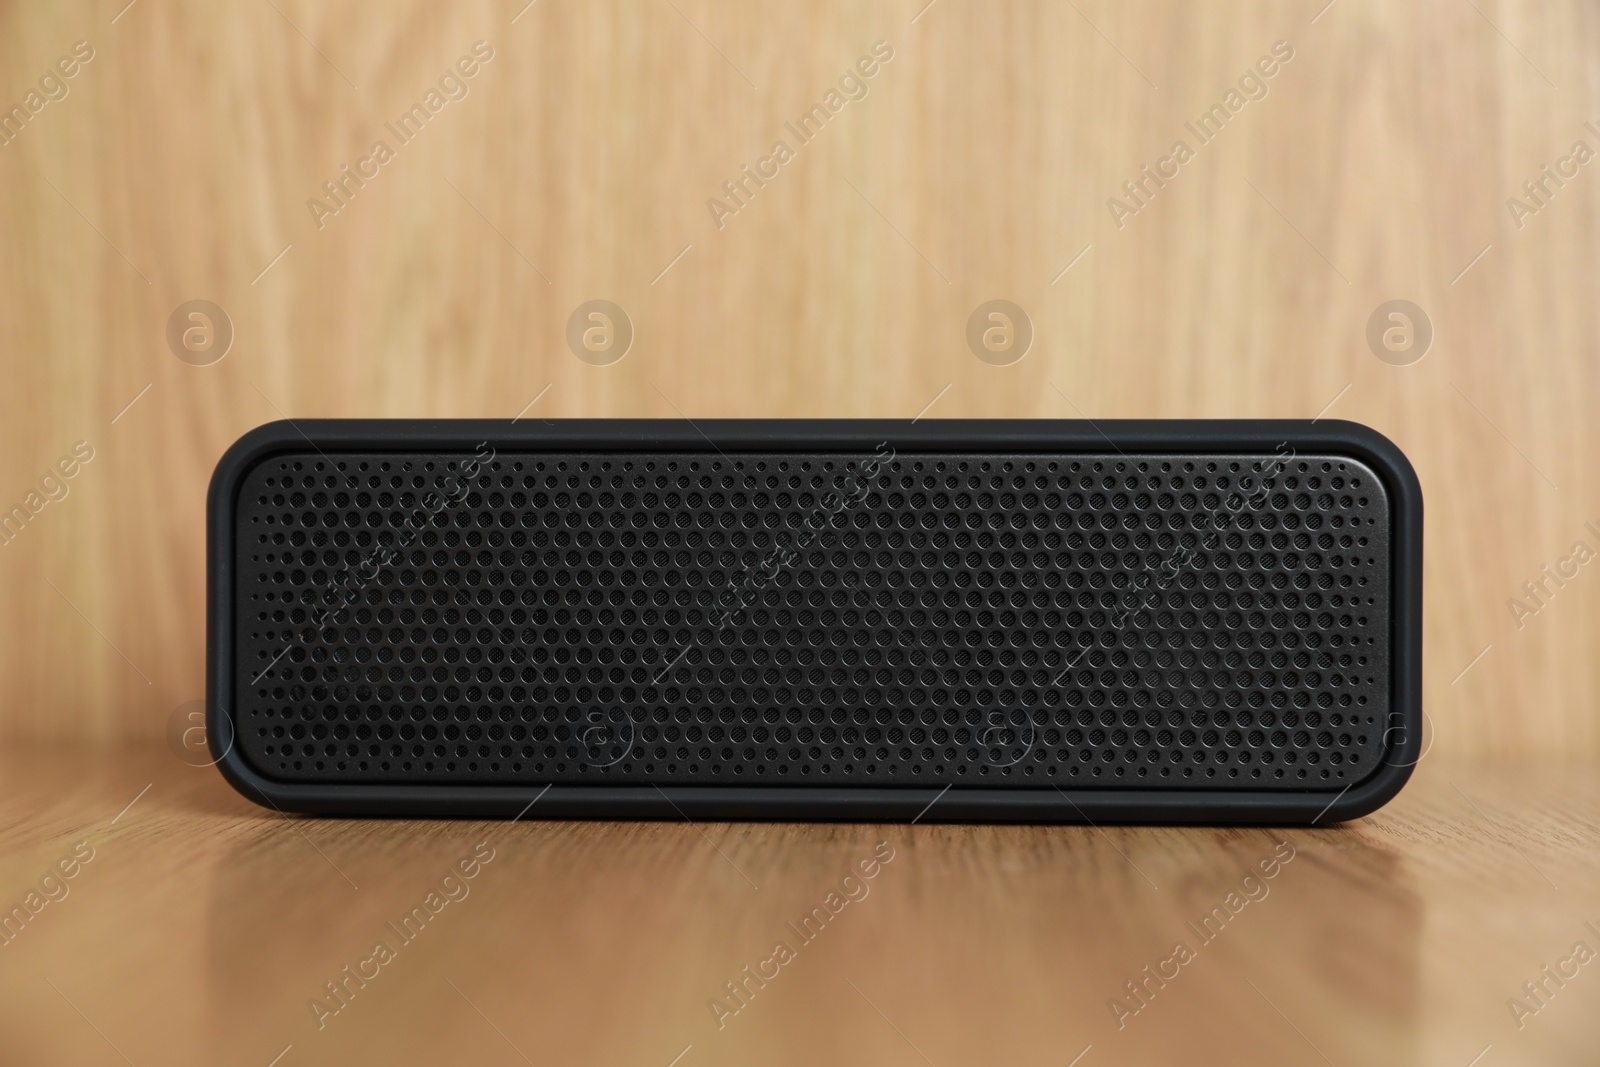 Photo of One black portable bluetooth speaker on wooden table. Audio equipment